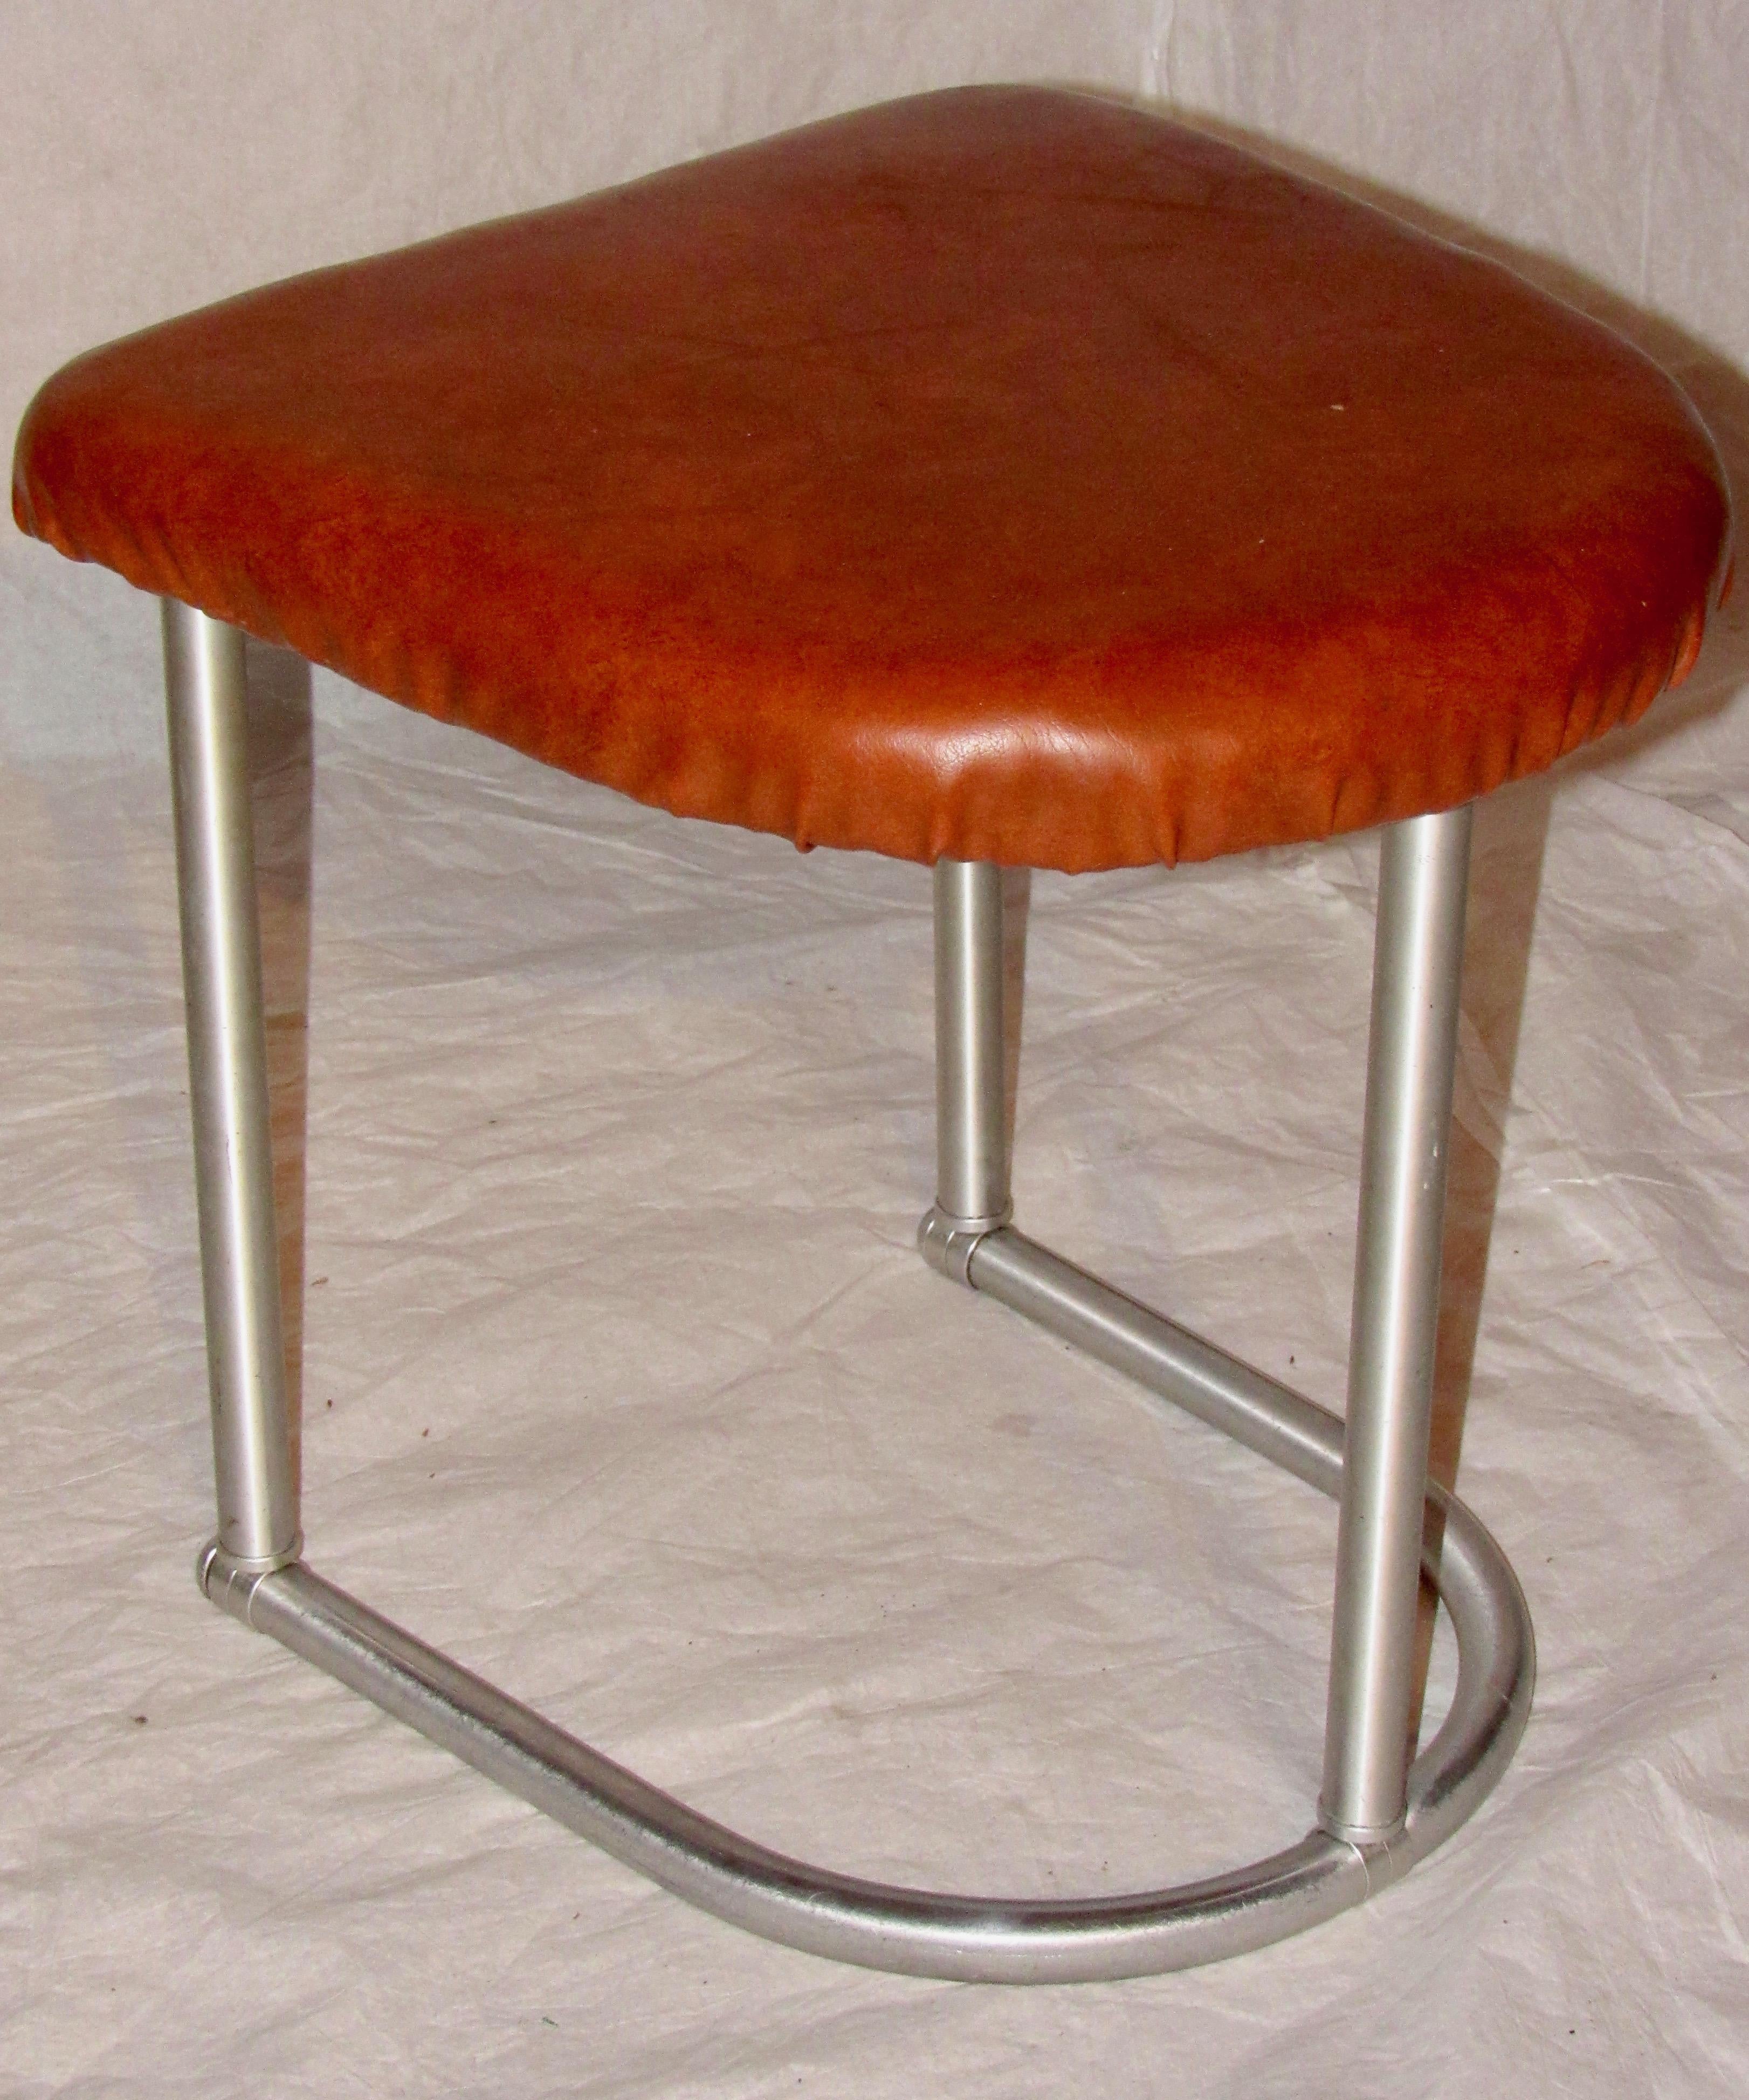 Warren McArthur aluminum vanity stool from the mid- 1930s.
The stool is worn and has a separation crack on the inside edge of one of the floor tube. Early McArthur is made from welded tube which can separate over time. The seat cover is probably 50